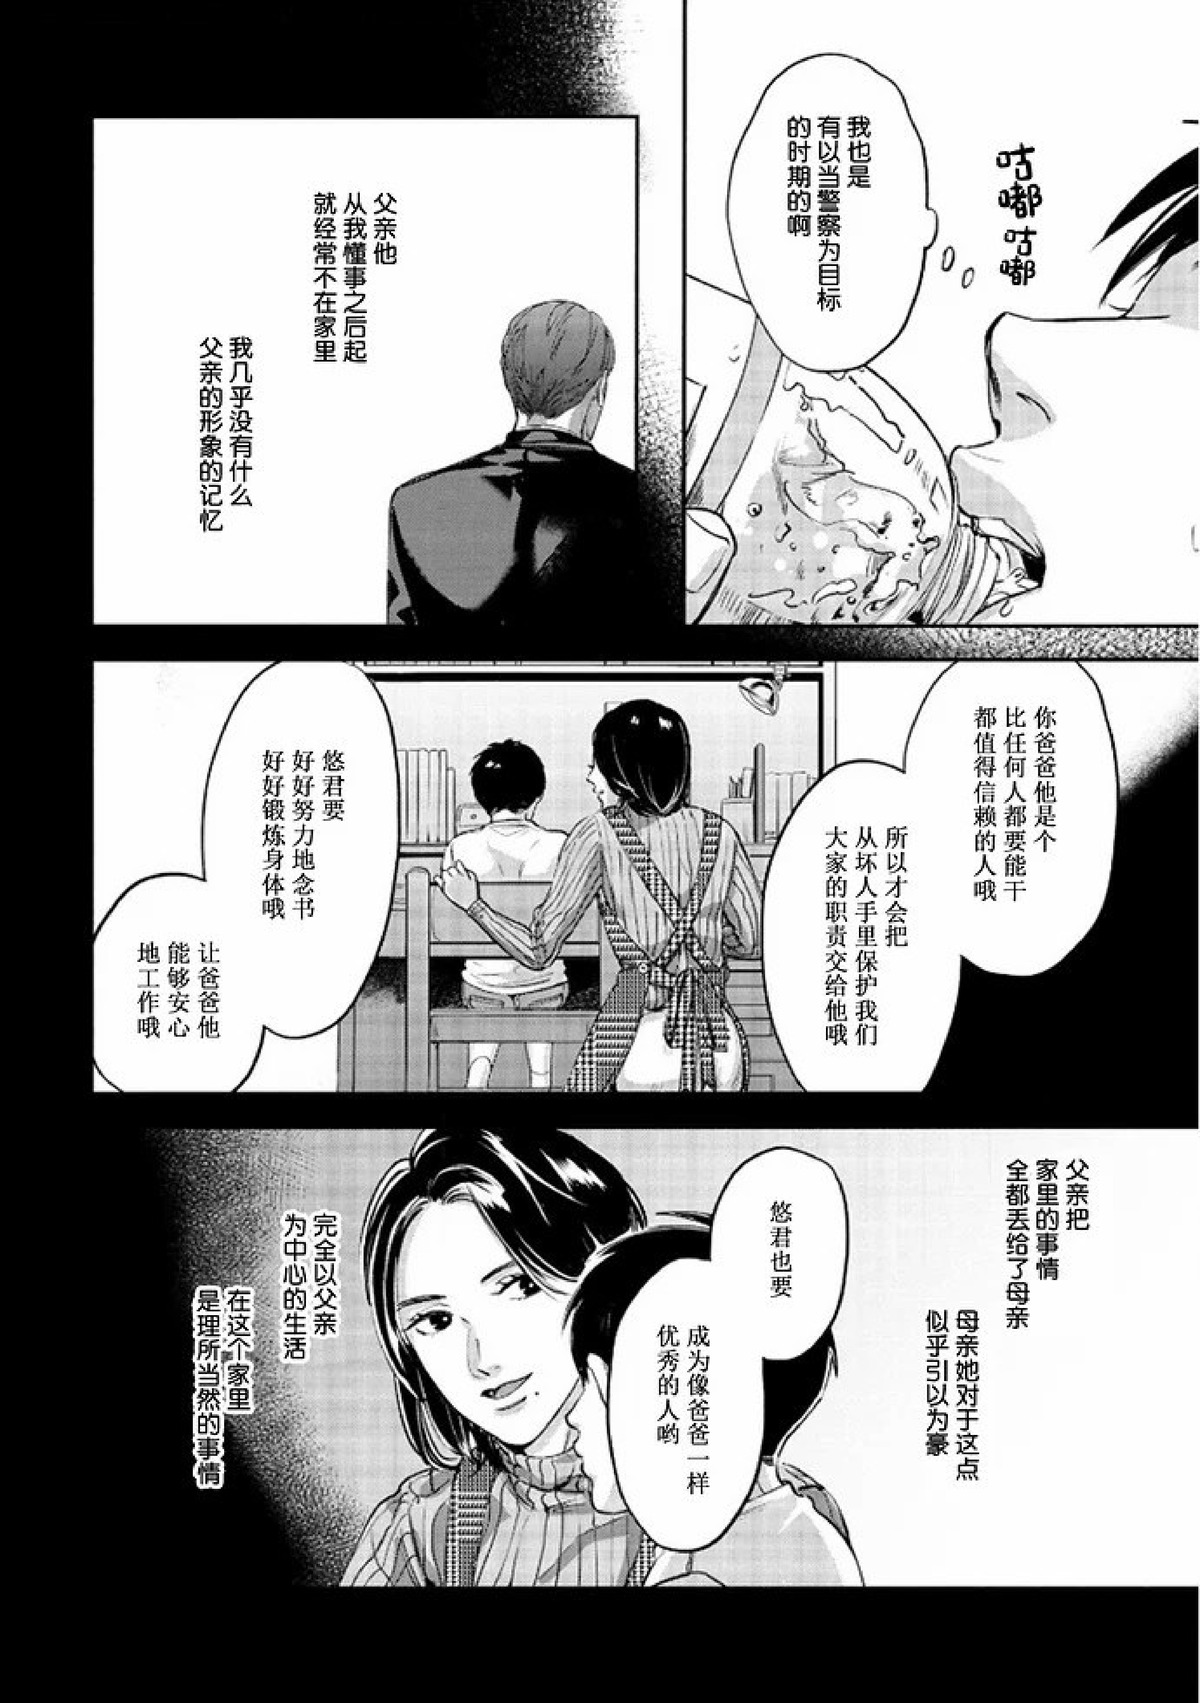 【Two sides of the same coin[腐漫]】漫画-（上卷01-02）章节漫画下拉式图片-20.jpg